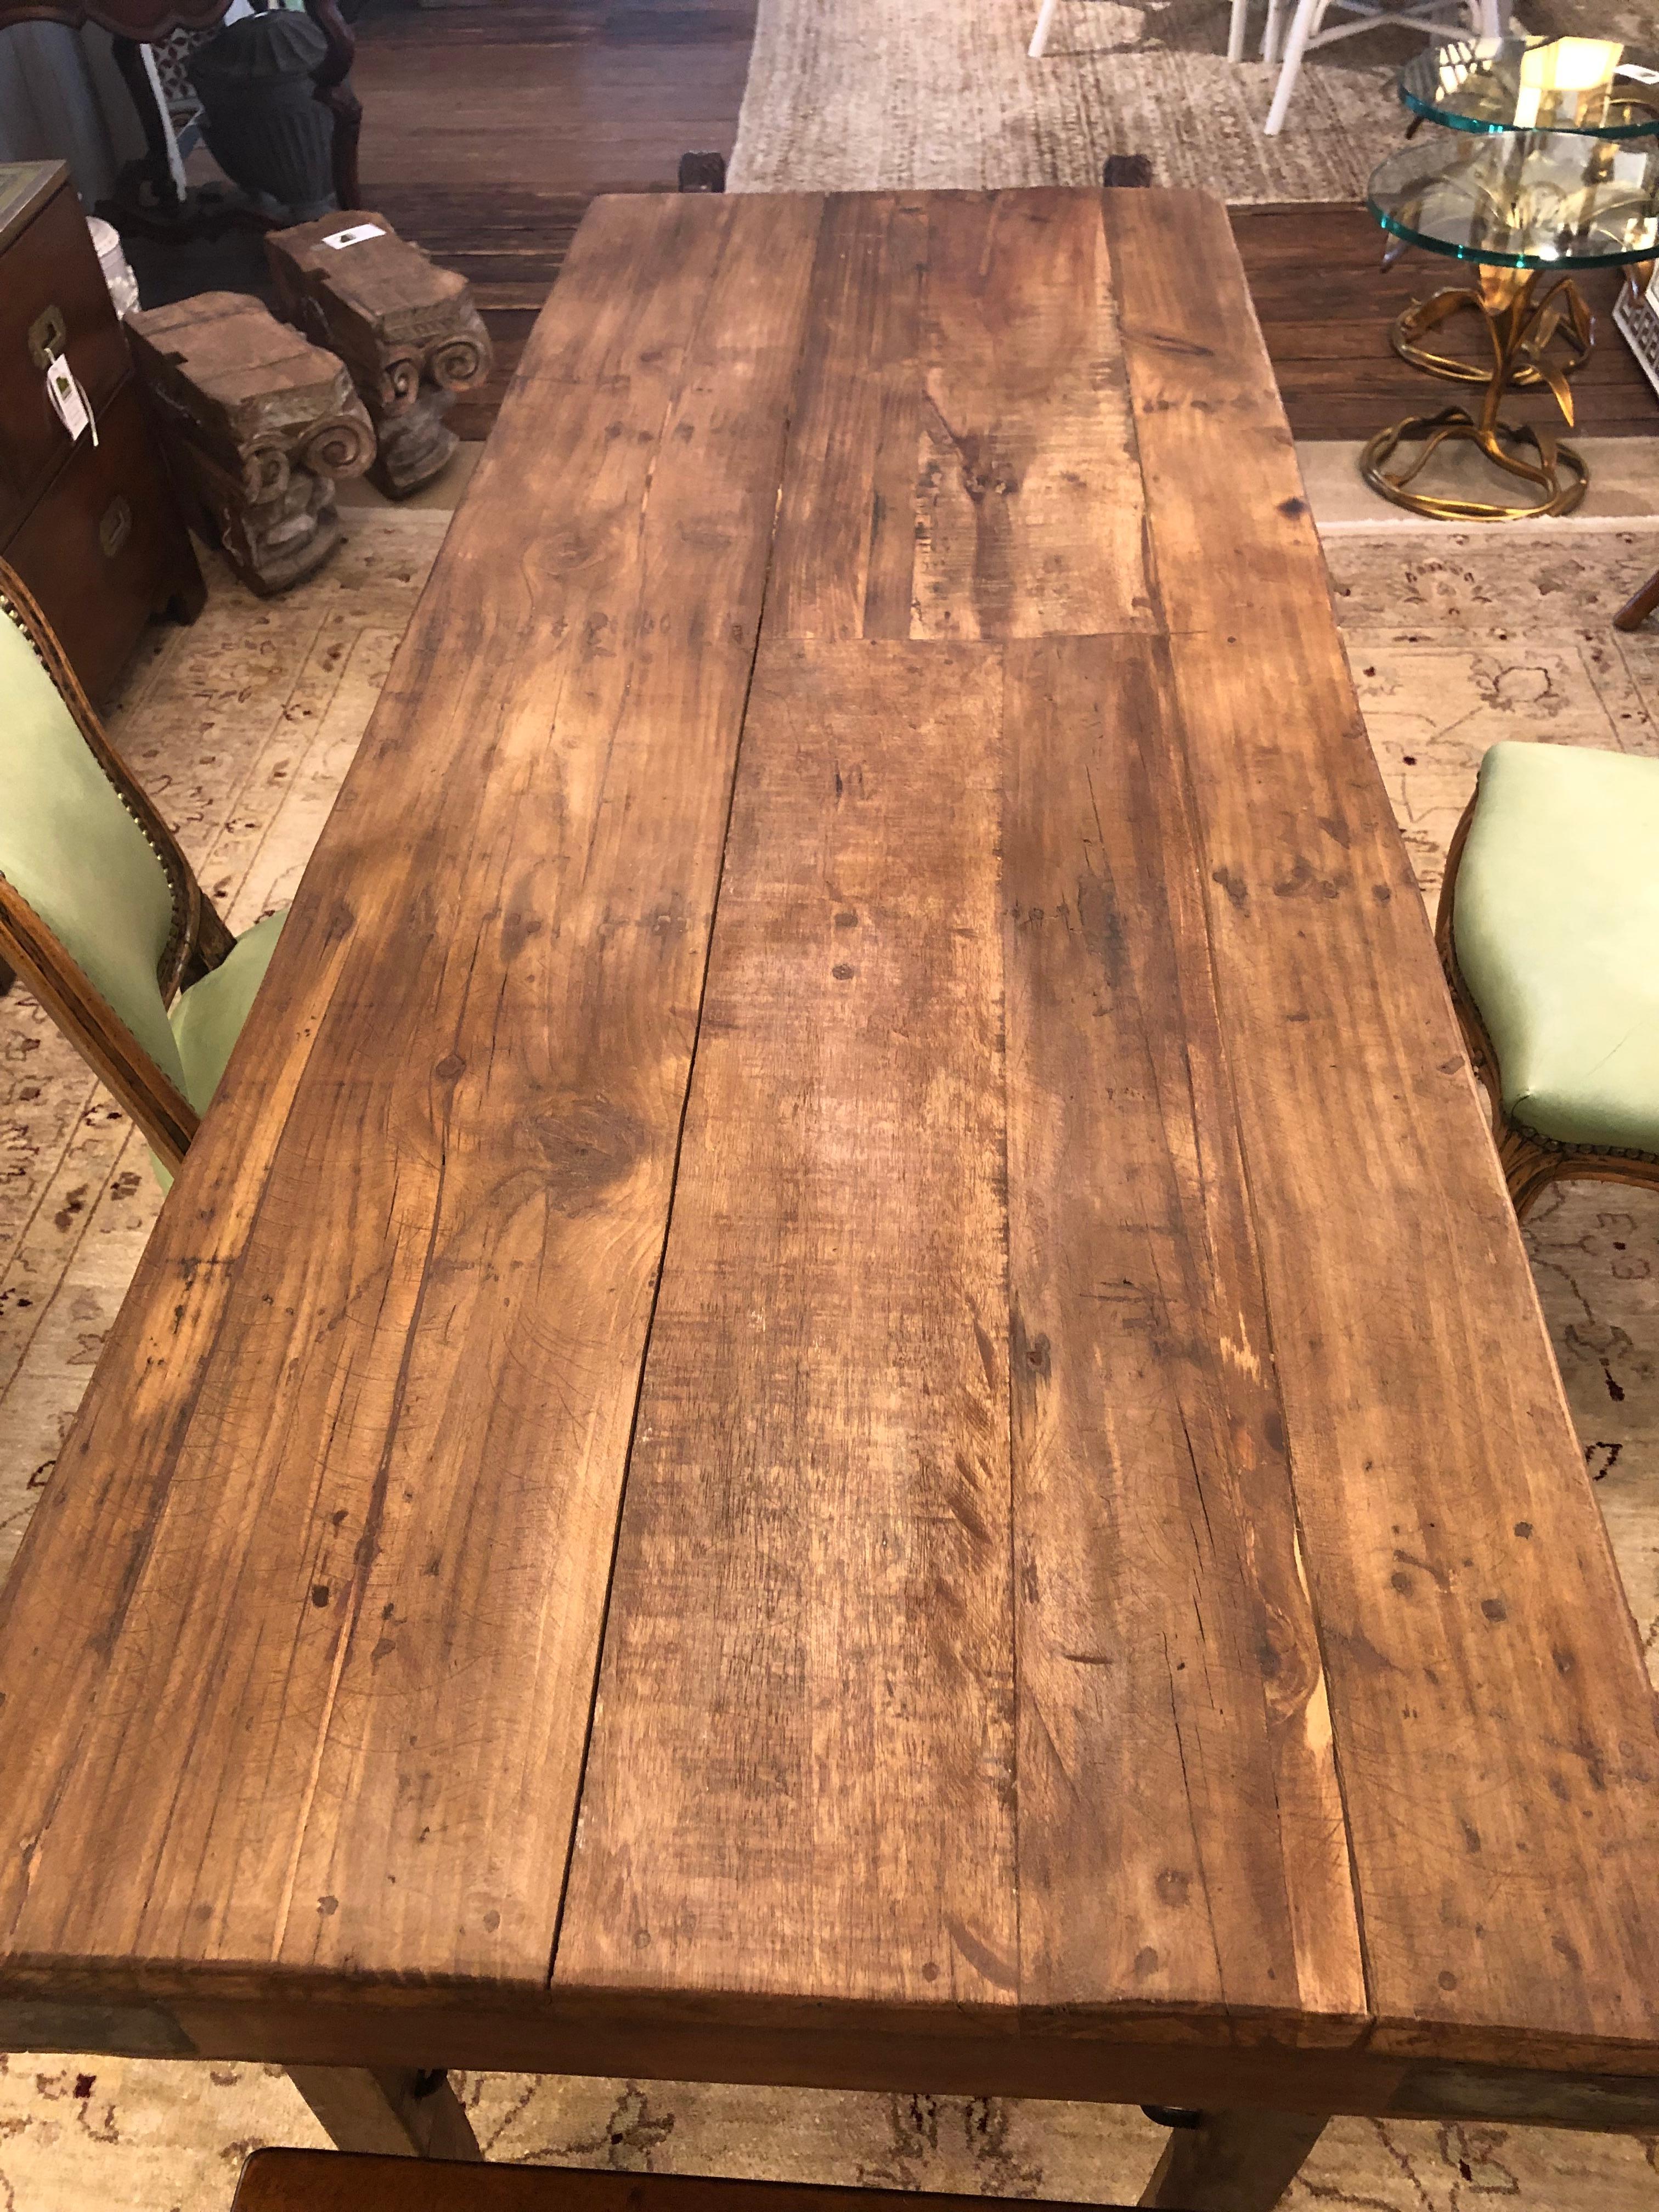 Charming versatile vintage pine tavern table having plank top, iron reinforced corners, and collapsible legs. Could be used as a narrow dining table , console or work table.
Apron 26.75 h.